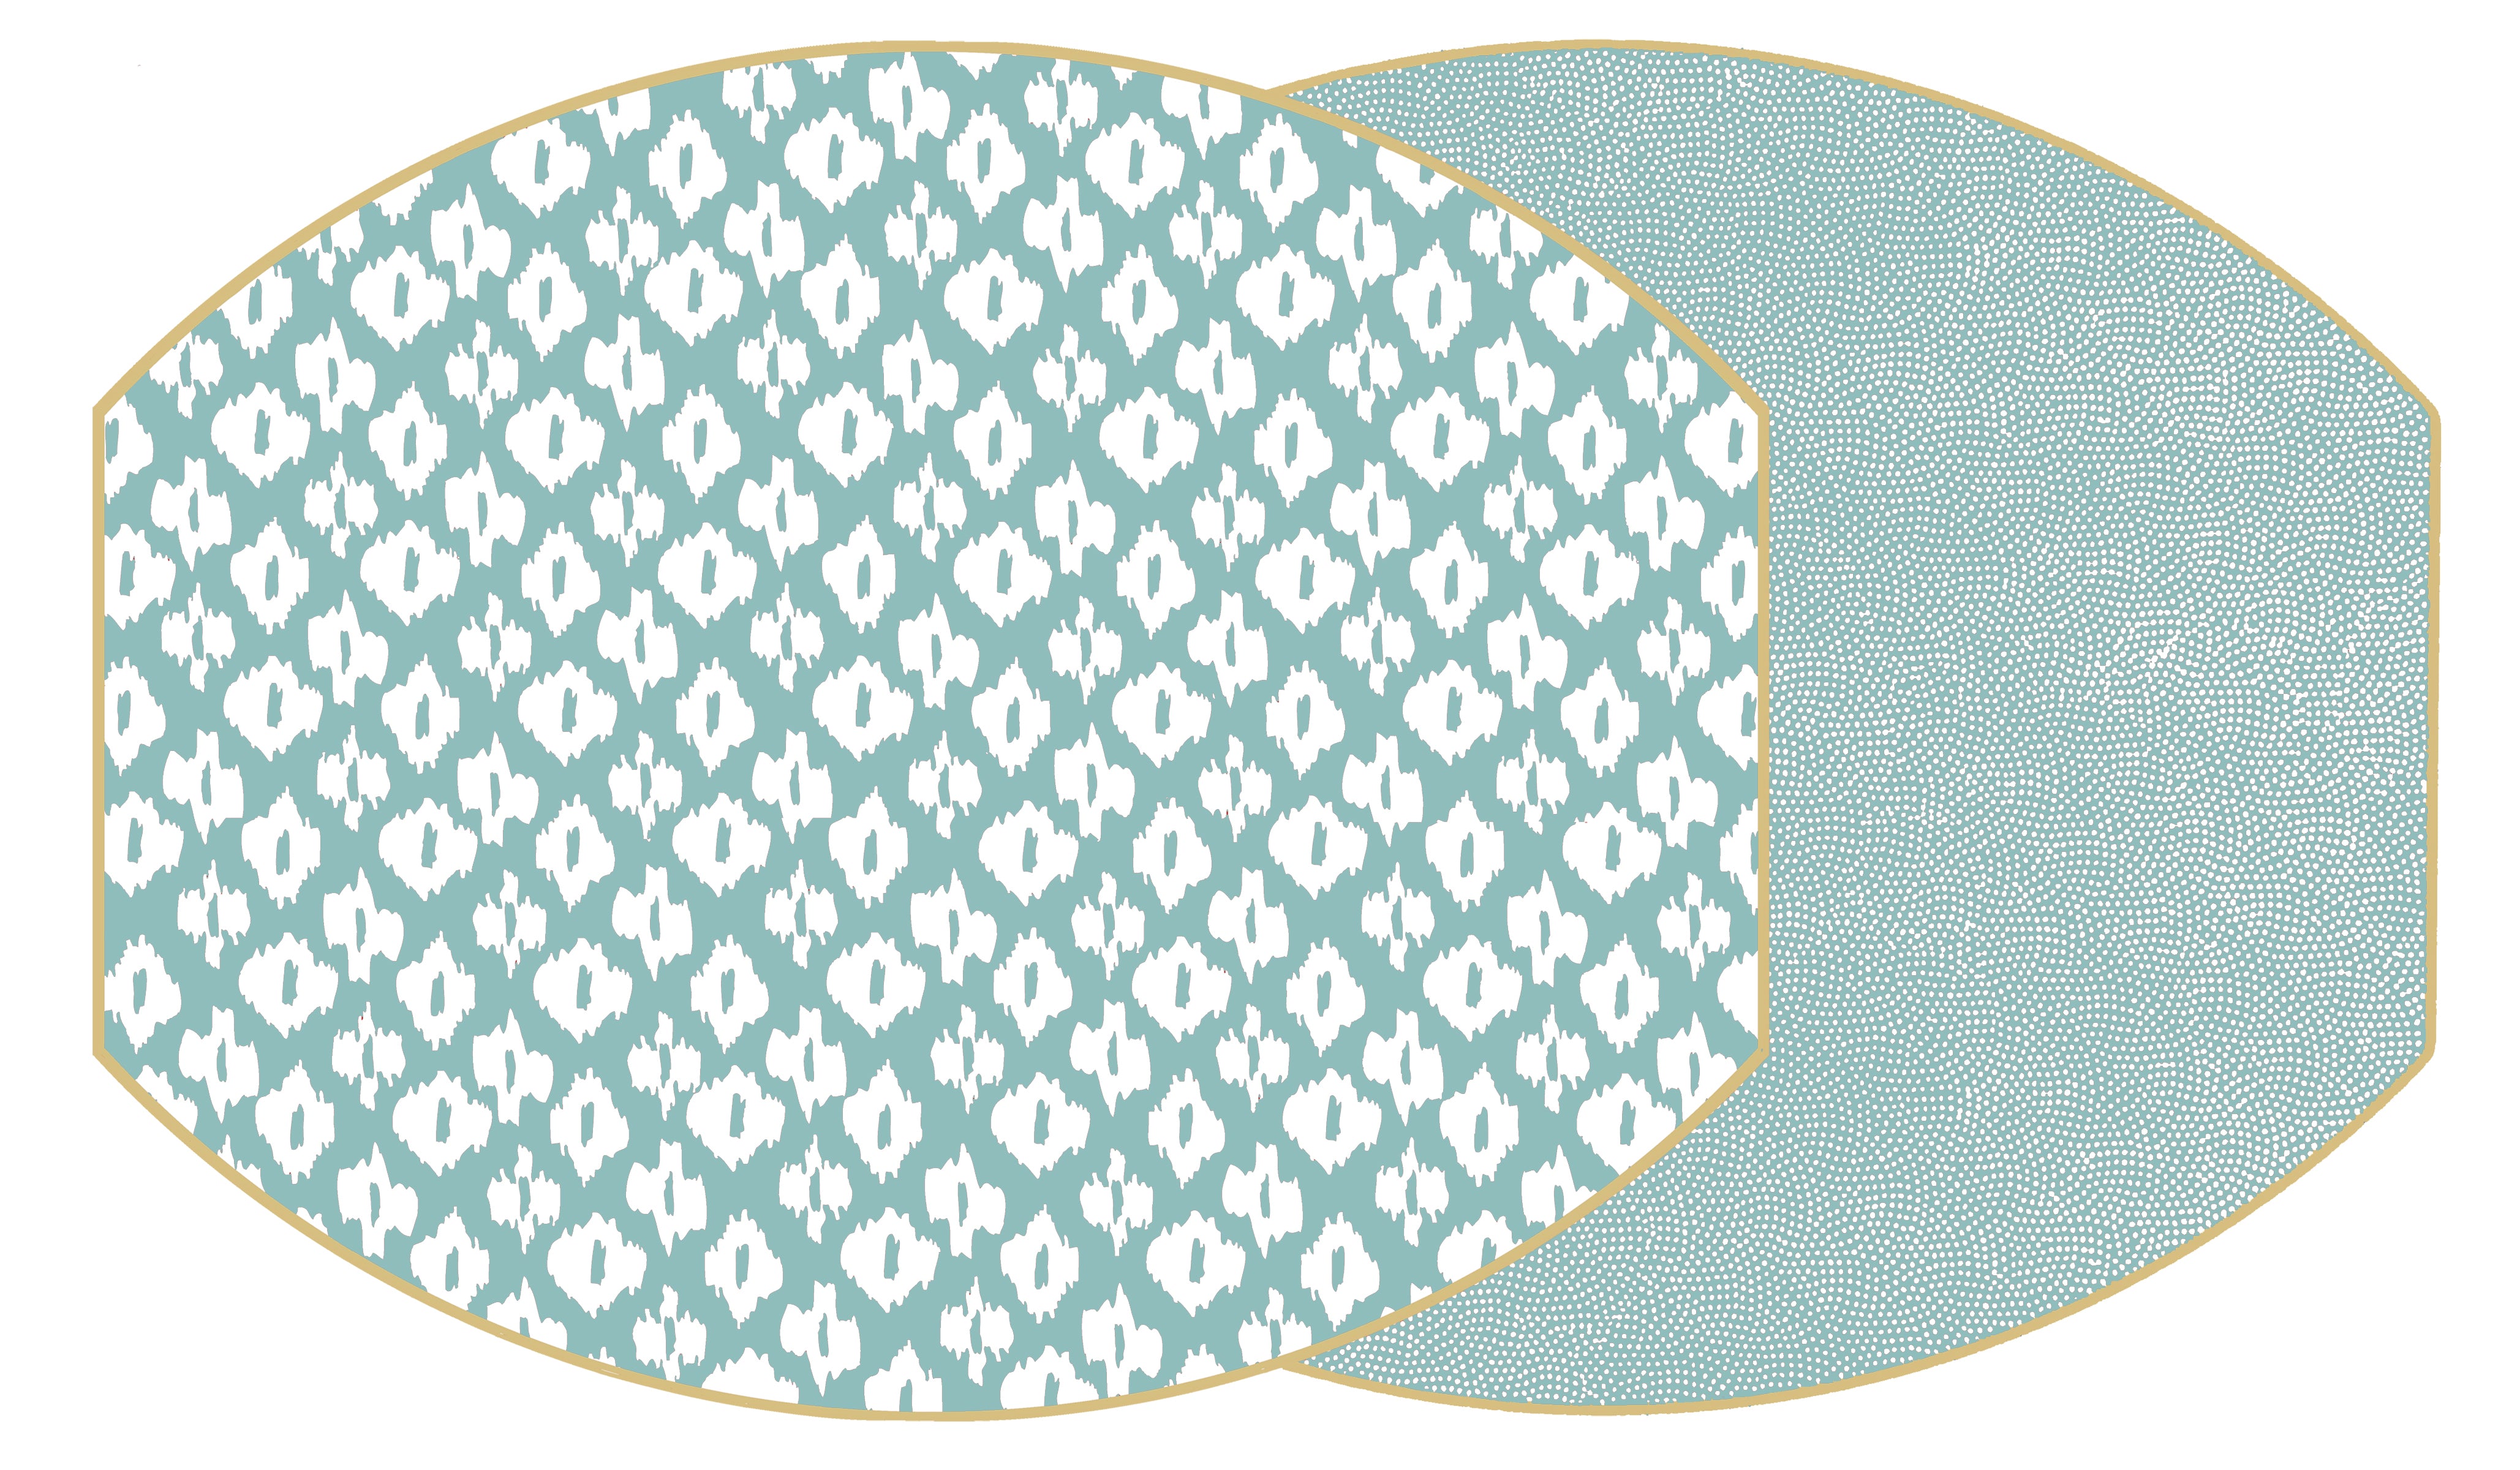 ELLIPSE TWO SIDED IKAT PLACEMAT ~ 6 COLORS